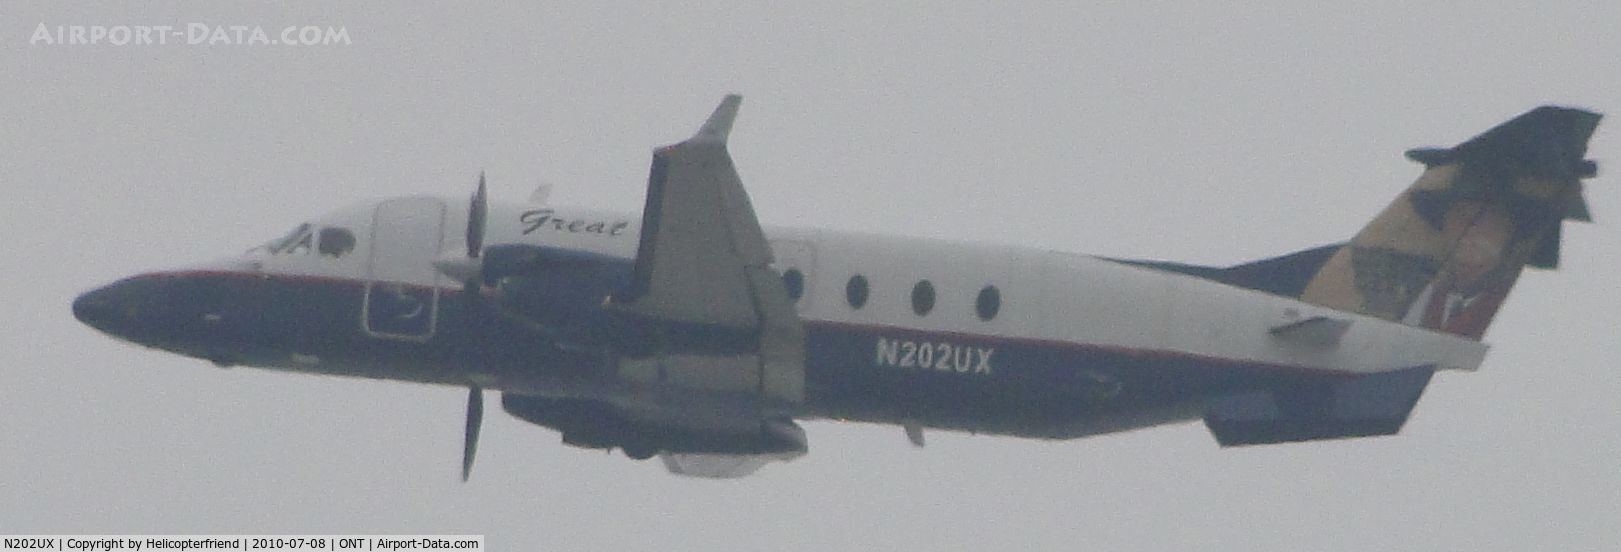 N202UX, 1996 Beech 1900D C/N UE-202, Heading westbound after lift off from runway 26R on a gloomy morning